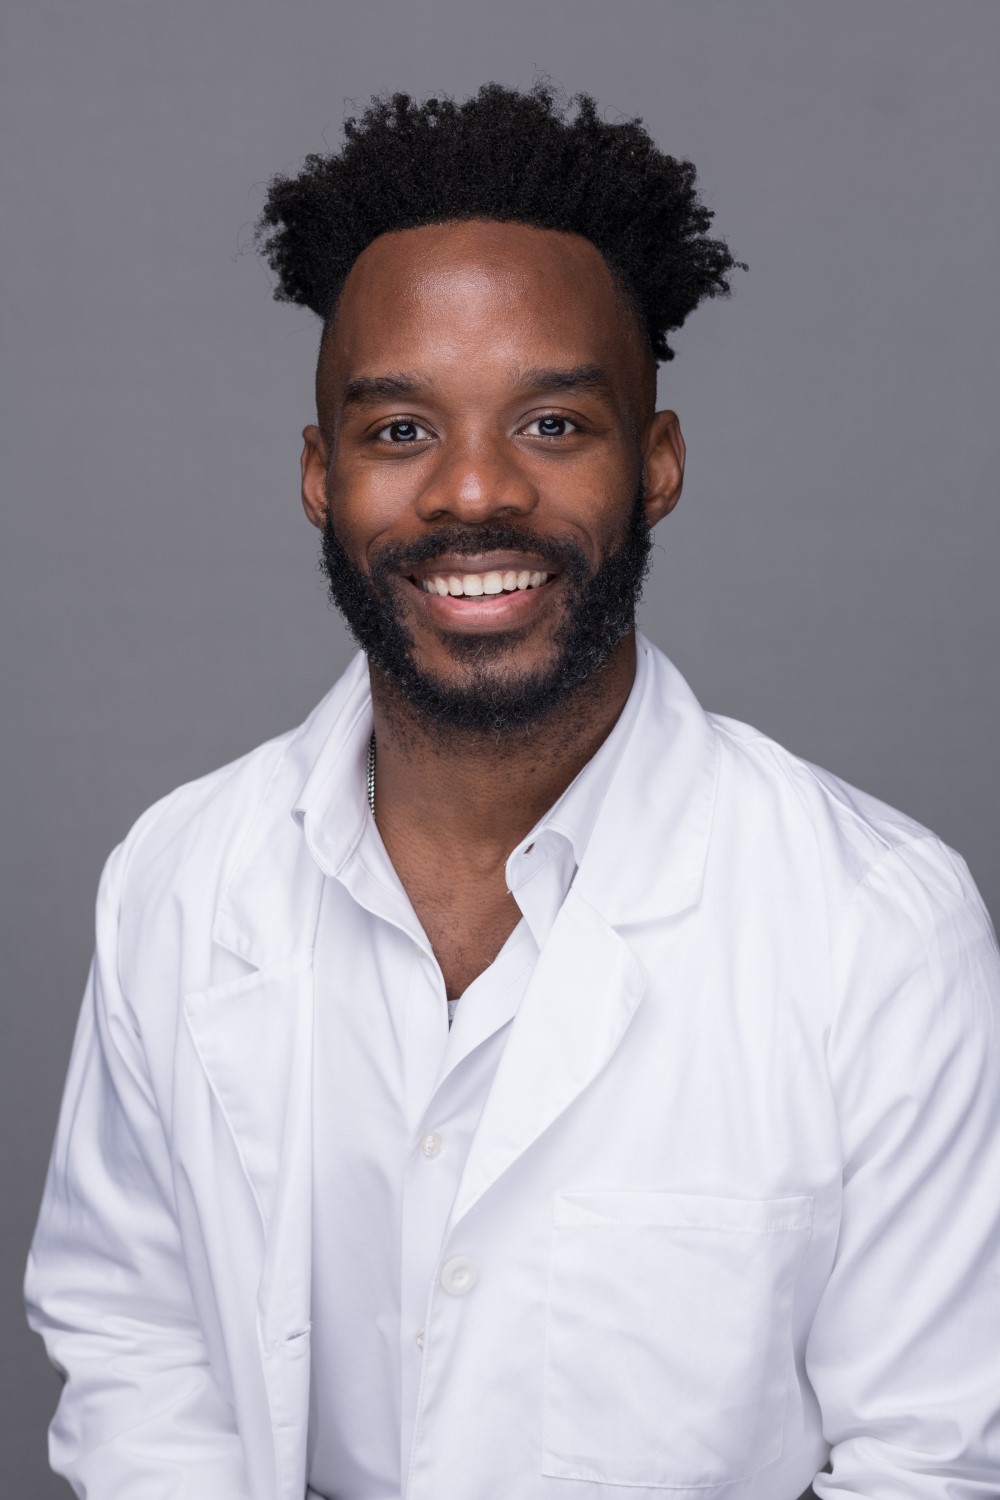 Dr. Jelani Brown, DDS, a pediatric dentist with Dentistry for Children serving patients in the Atlanta, GA metro area